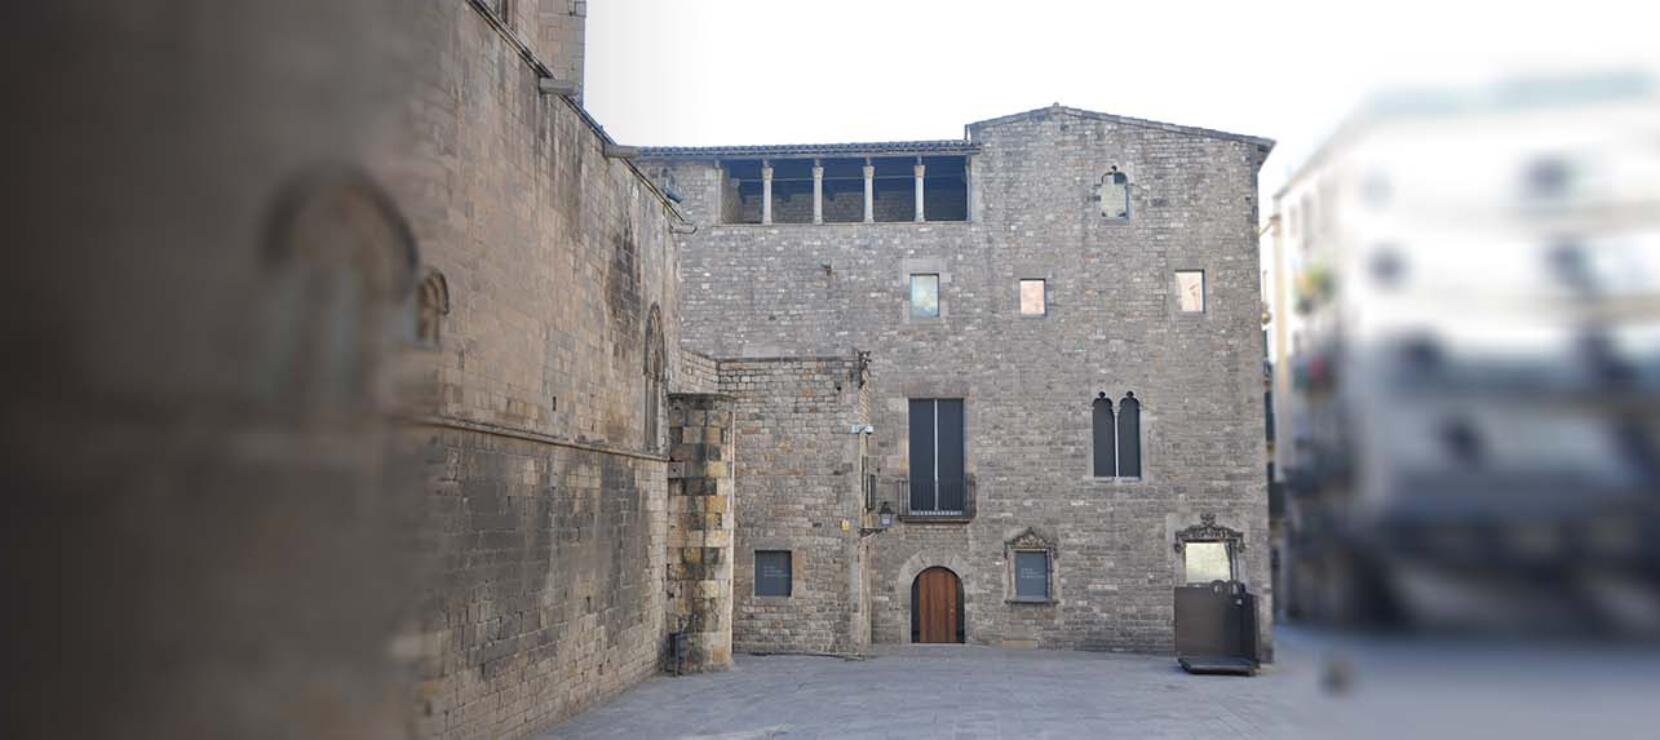 Emblematic Architectural Project Awarded: XV Century Palace in Barcelona